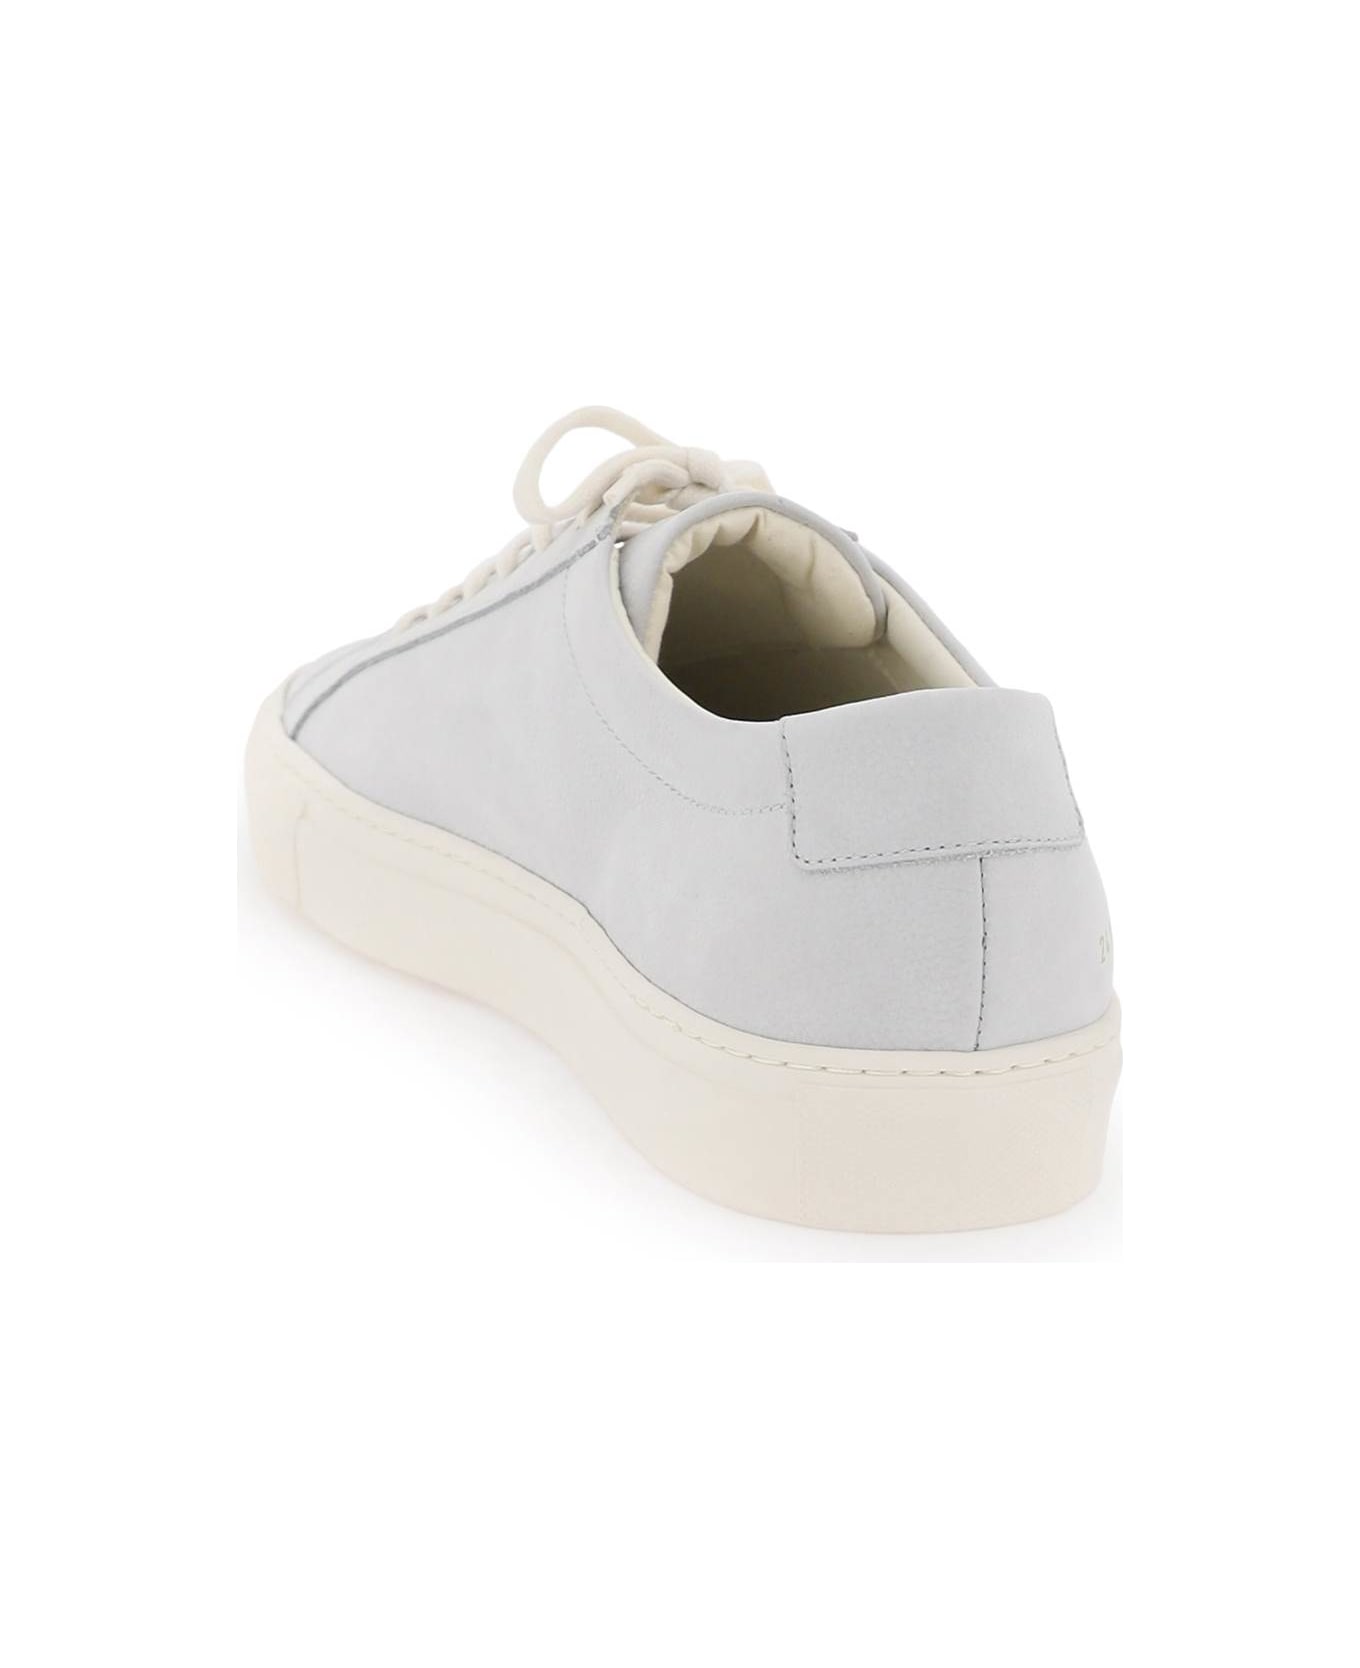 Common Projects Original Achilles Leather Sneakers - GREY (Grey)